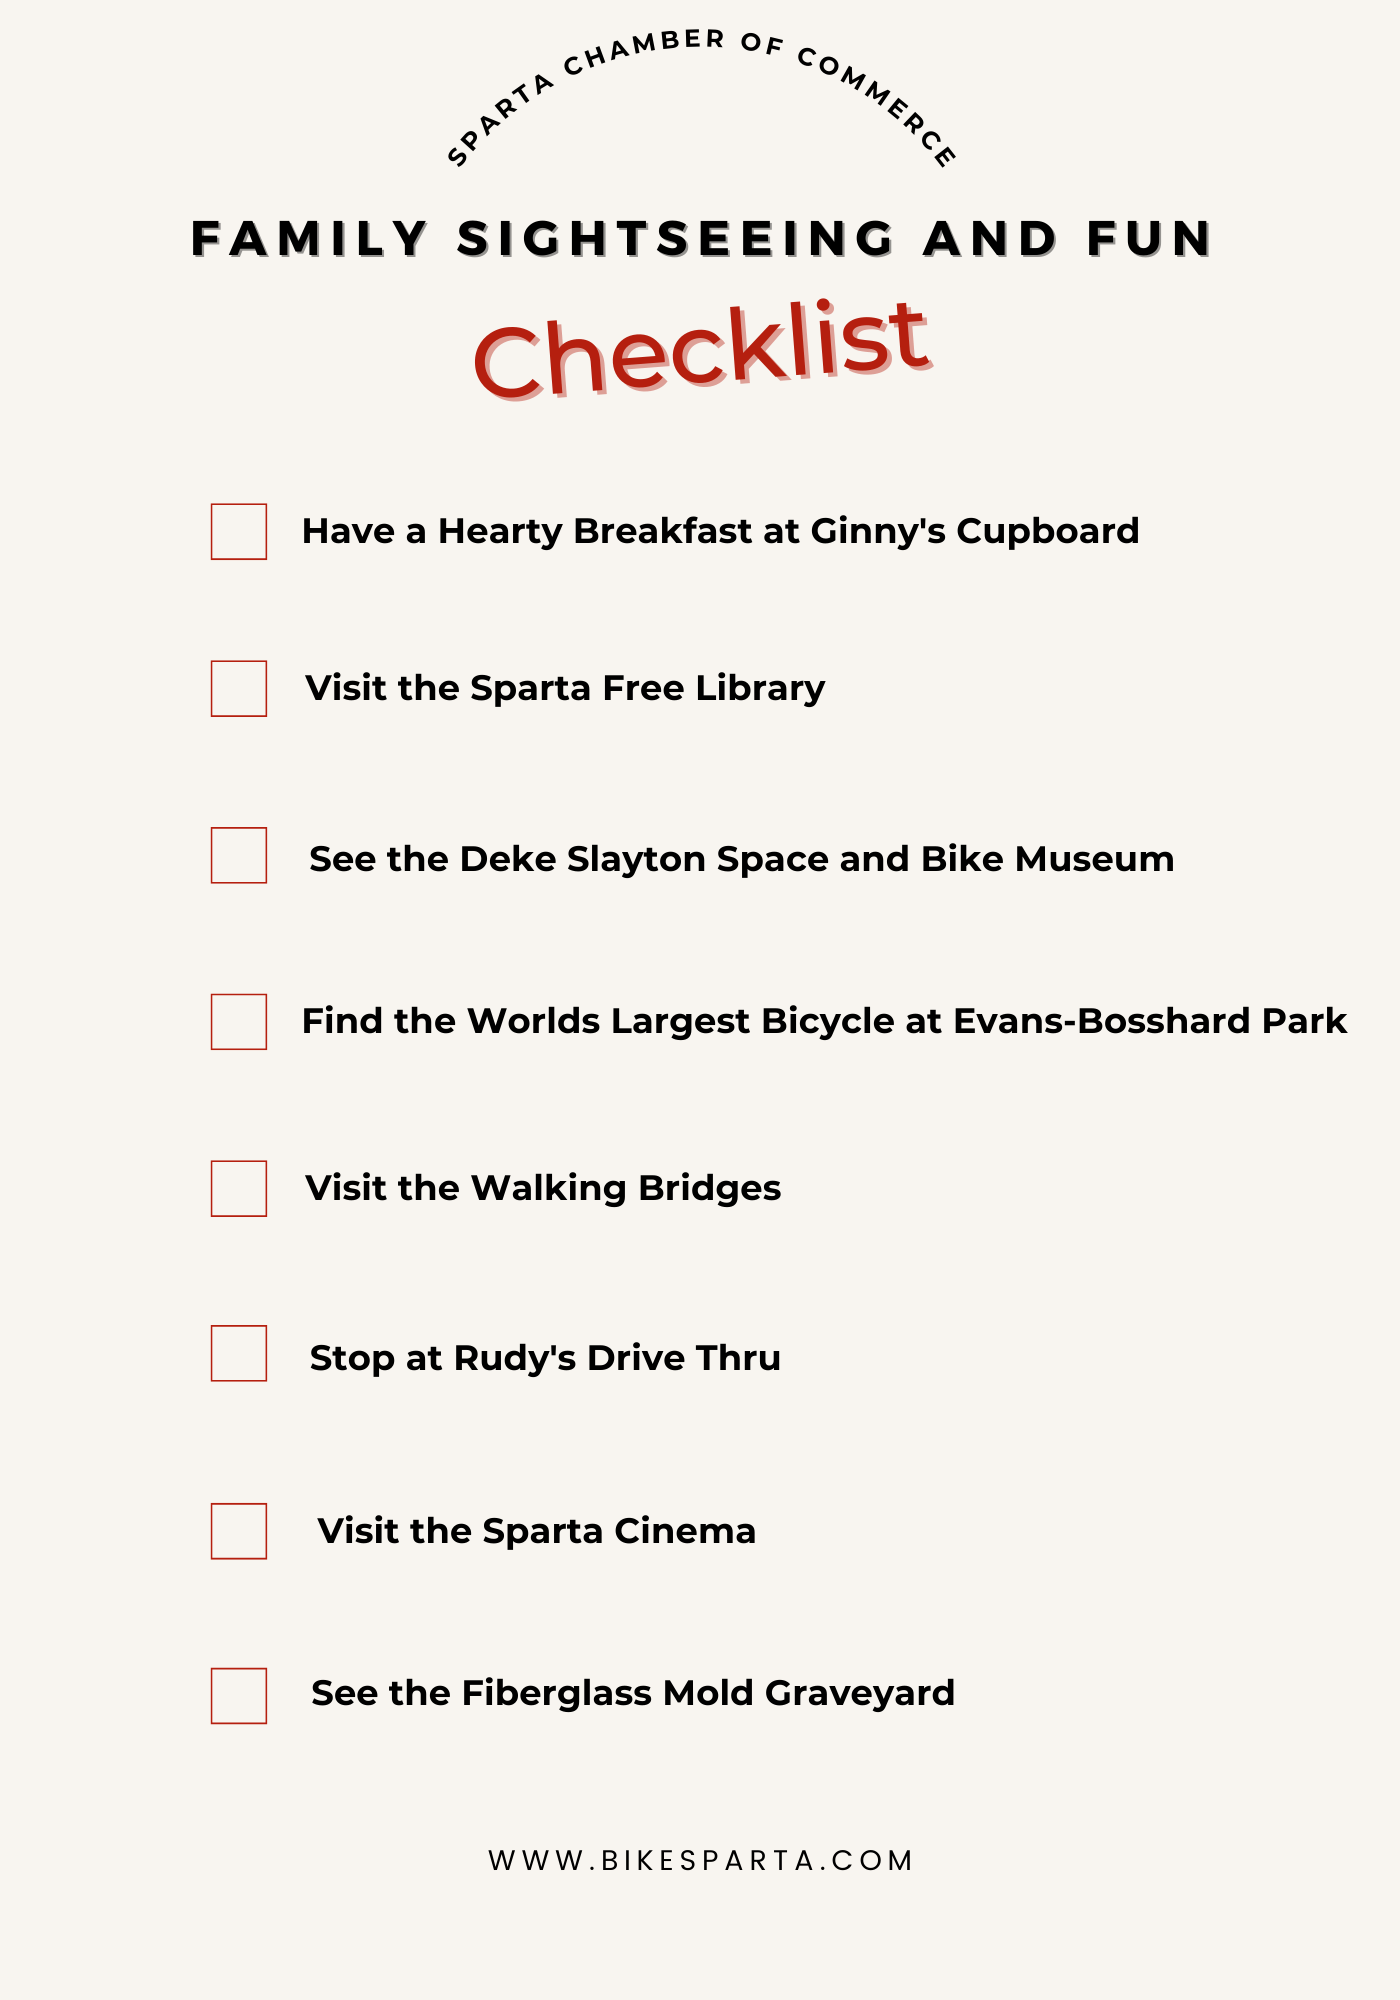 Family Sightseeing and Fun checklist